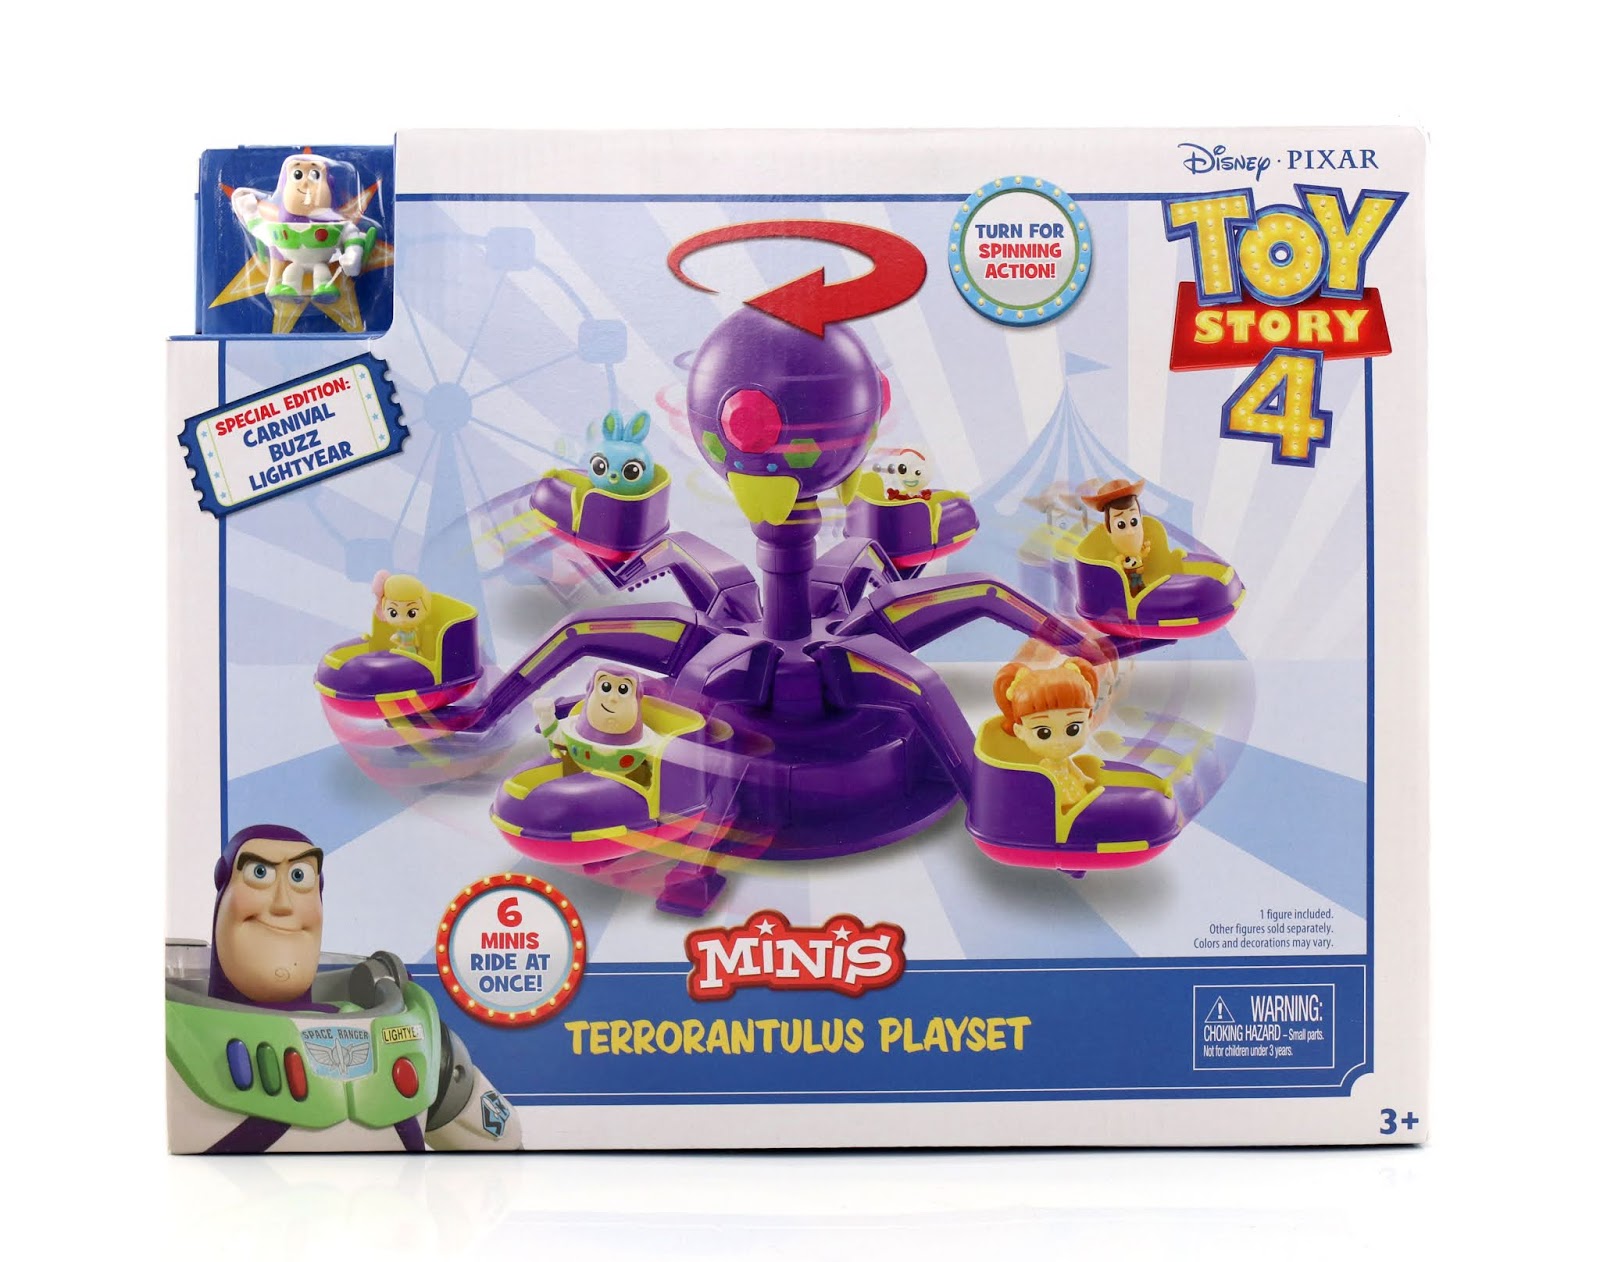 Toy Story 4 "Minis" Terrorantulus Playset review